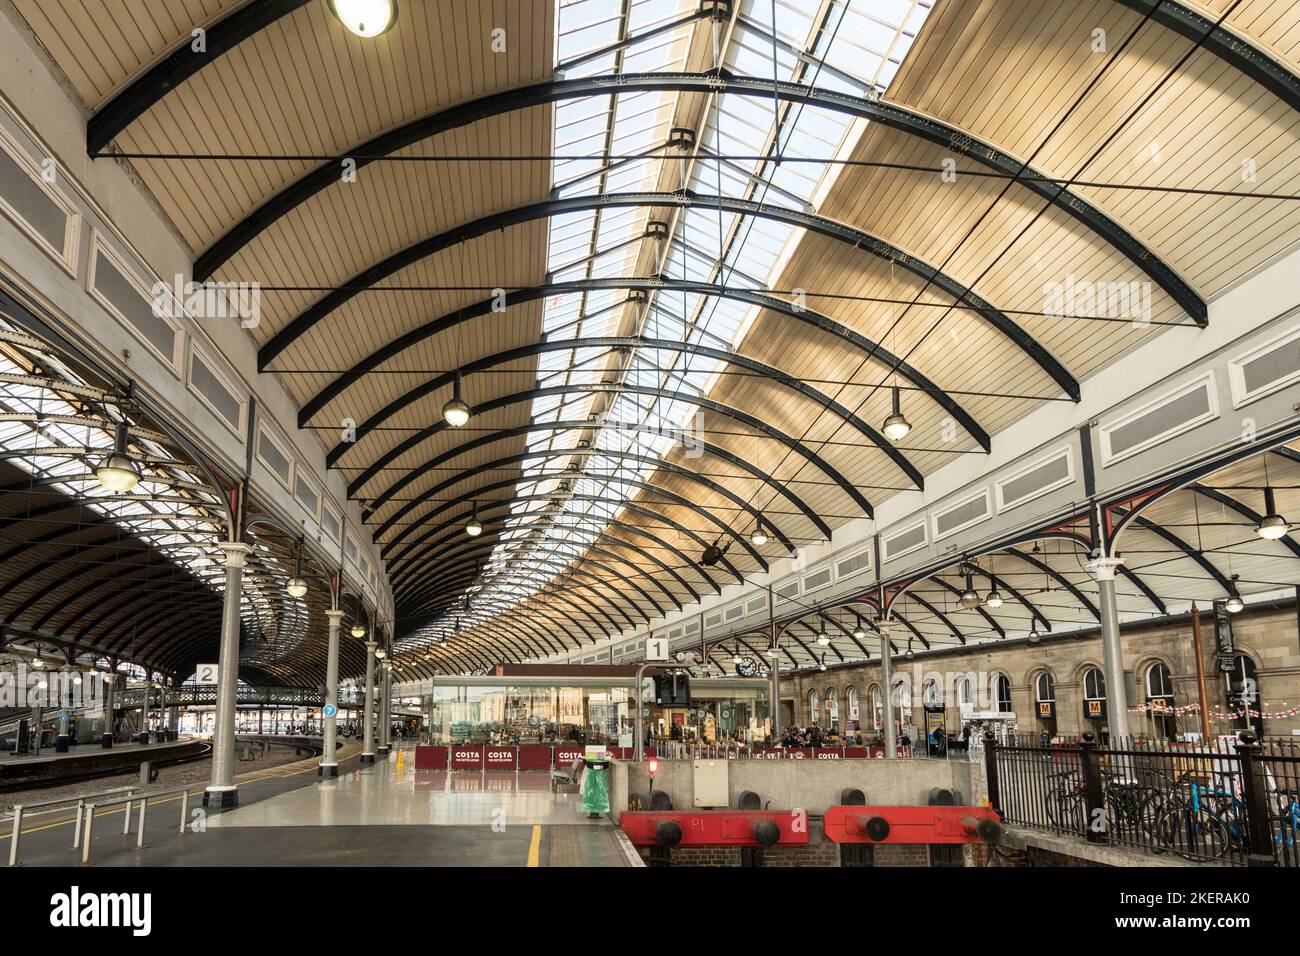 The interior of Newcastle Central railway station, showing the curved roof and iron supporting structure, Newcastle upon Tyne, England, UK Stock Photo